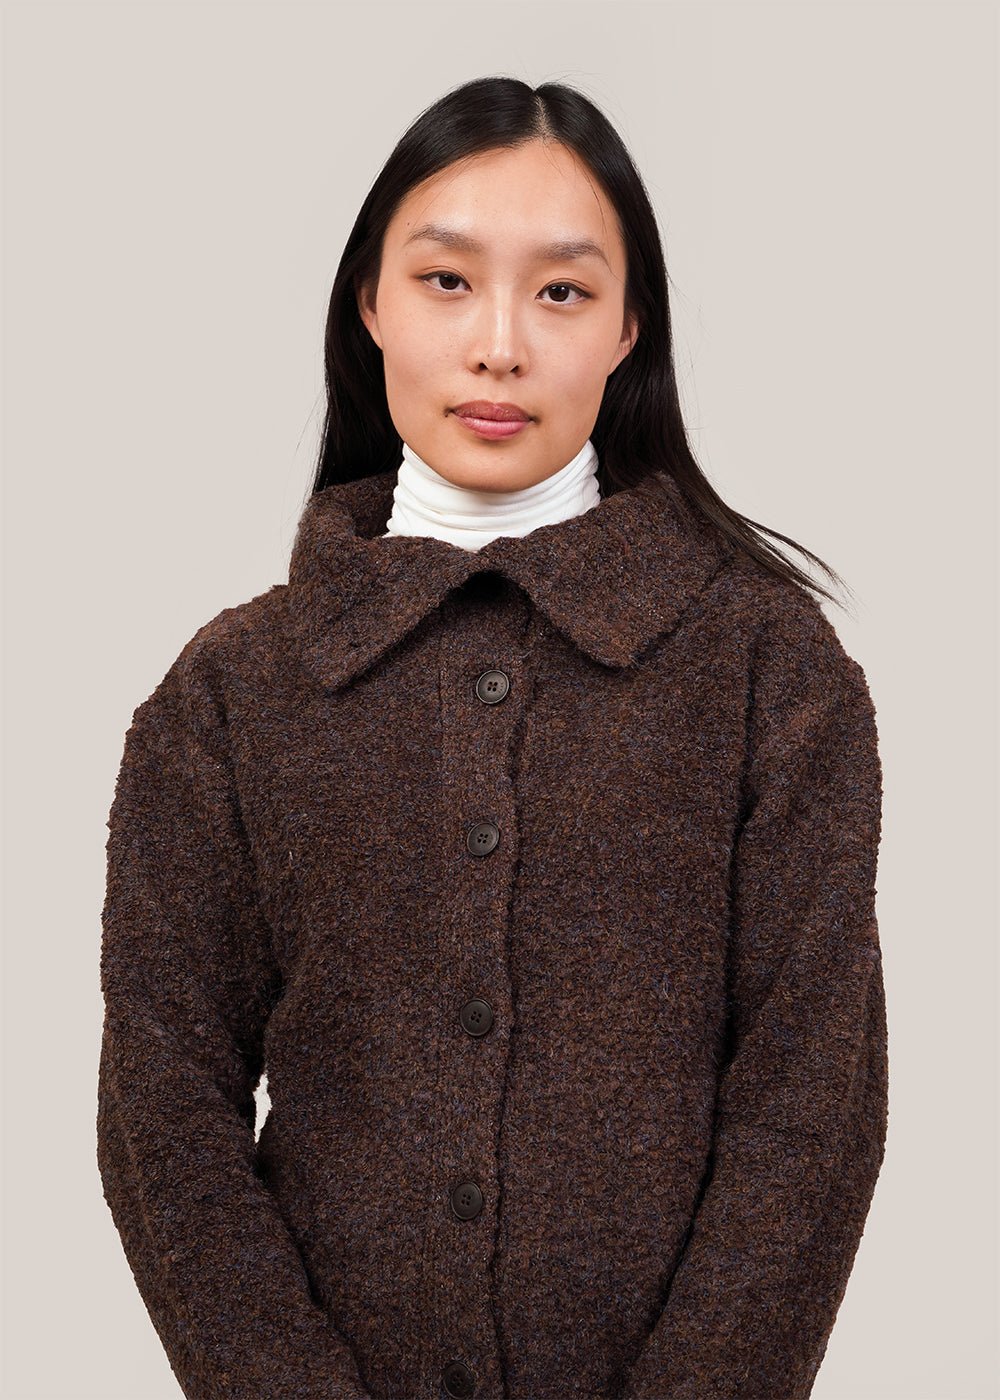 Mijeong Park Brown Spread Collar Boucle Cardigan - New Classics Studios Sustainable Ethical Fashion Canada